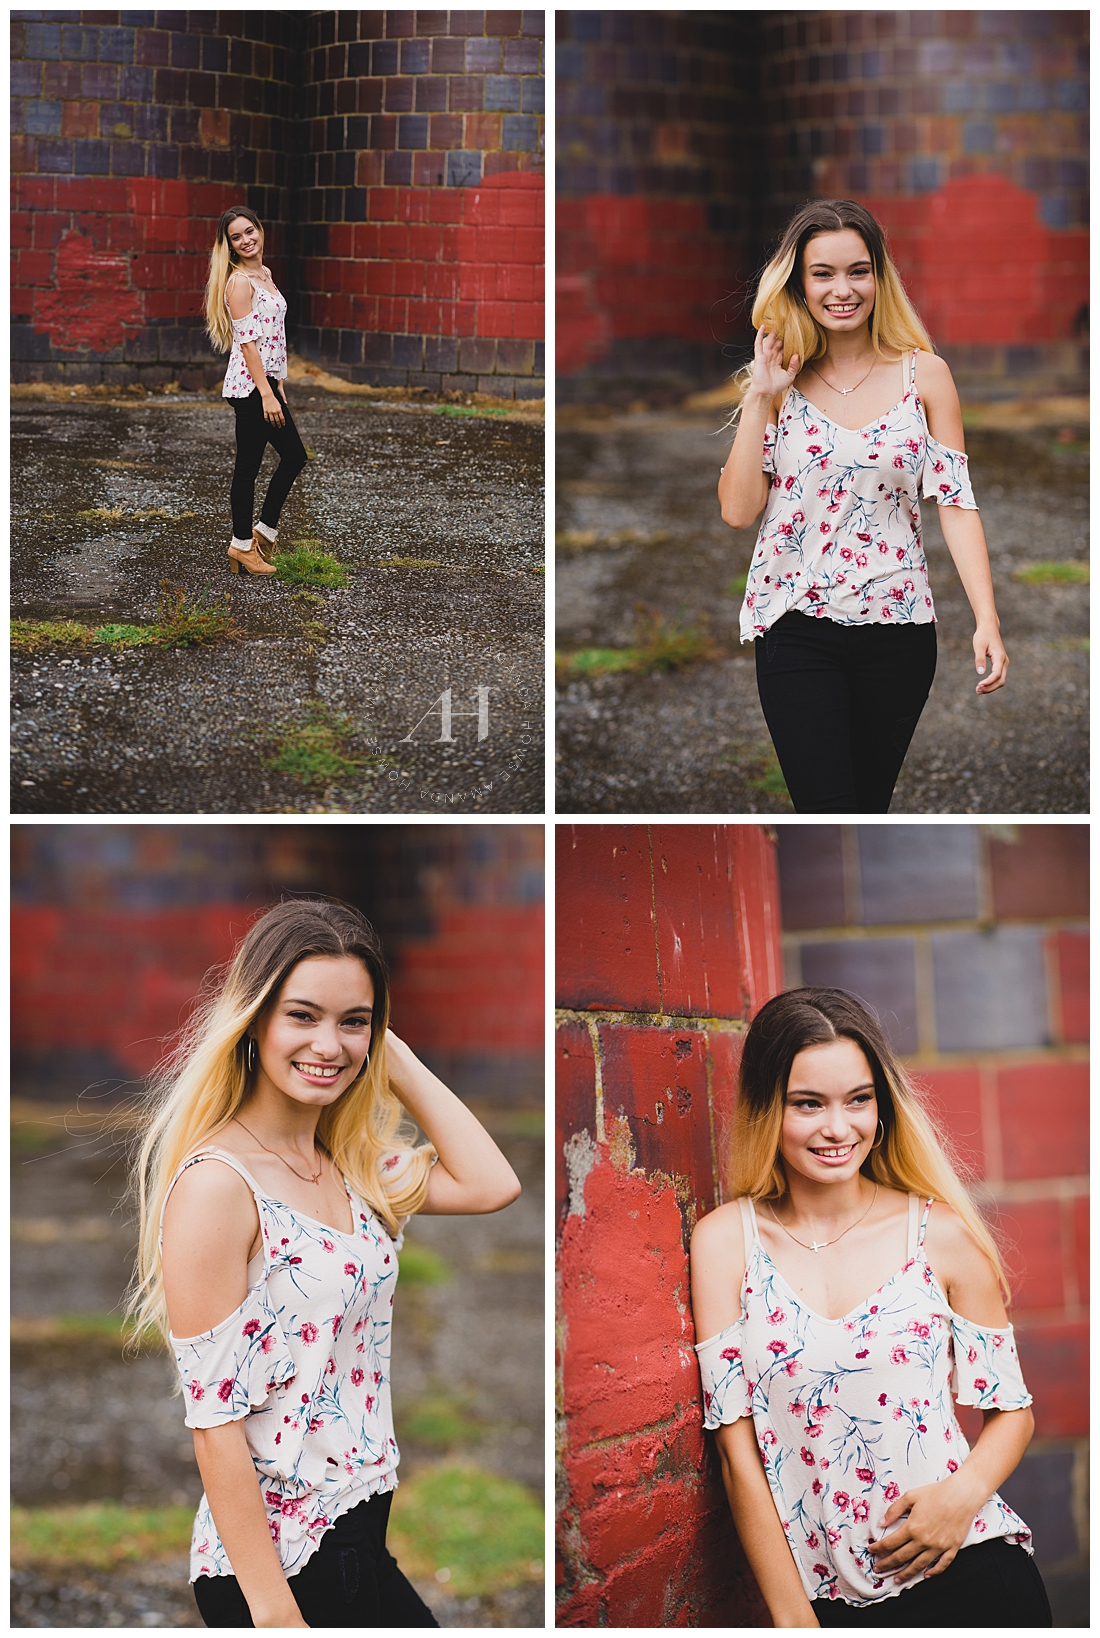 Modern Senior Portraits in Tacoma | Outfit and Pose Ideas for Seniors | Photographed by the Best Tacoma Senior Photographer Amanda Howse